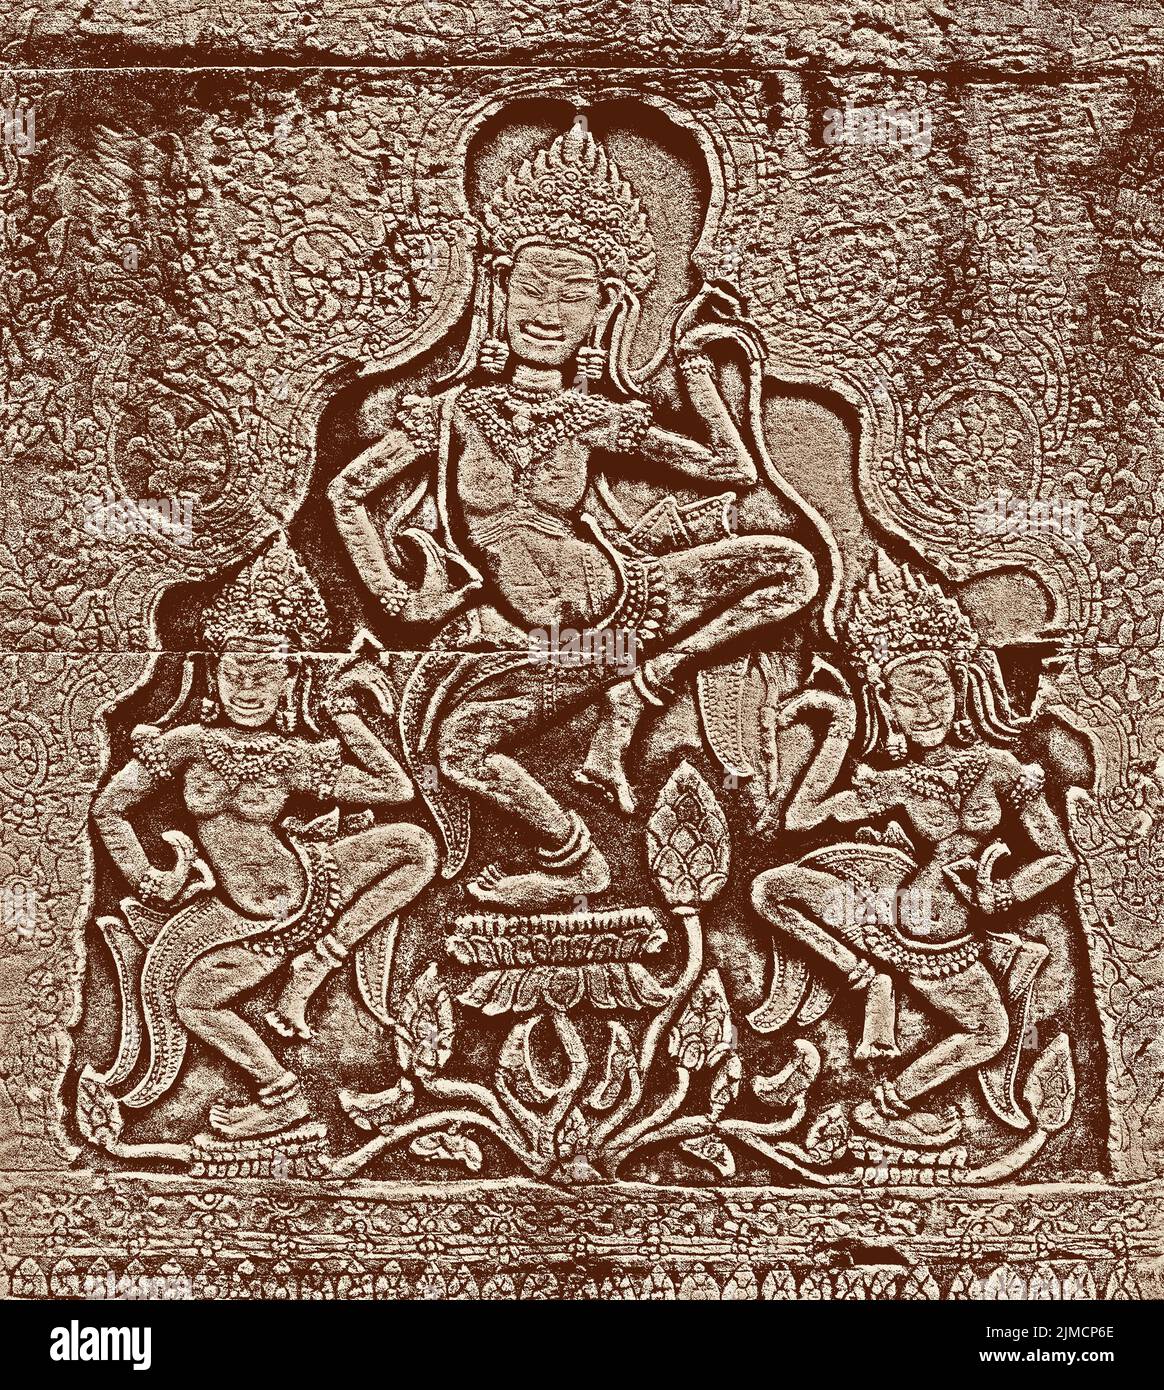 Historic Khmer bas-relief with dancing Hindu goddesses Stock Photo